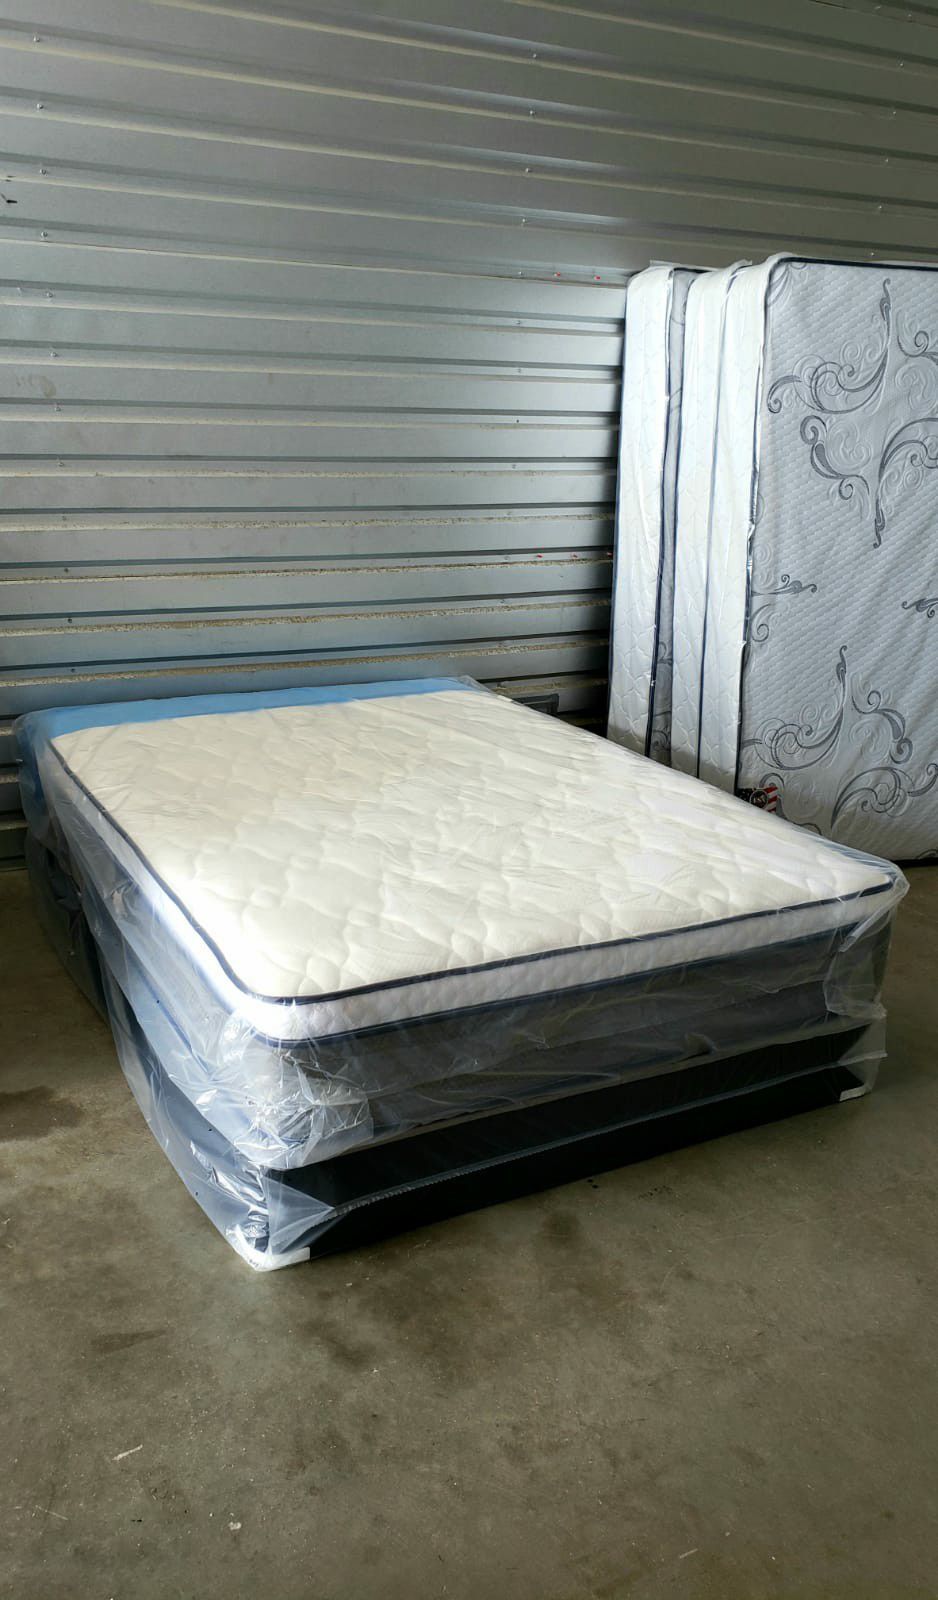 NEW FULL PILLOWTOP MATTRESS AND BOX SPRING 2PC, bed frame not included on price